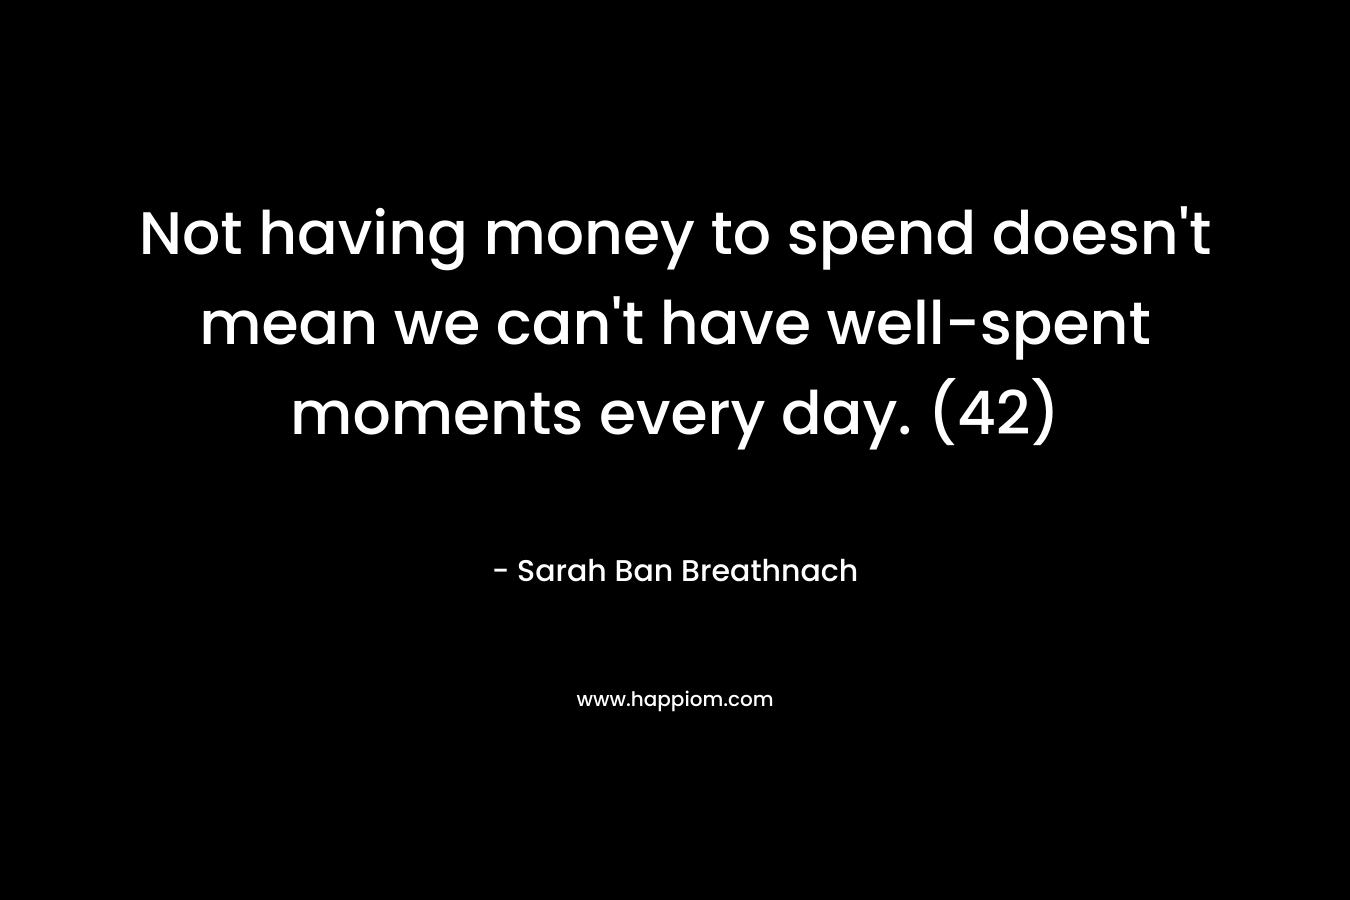 Not having money to spend doesn't mean we can't have well-spent moments every day. (42)